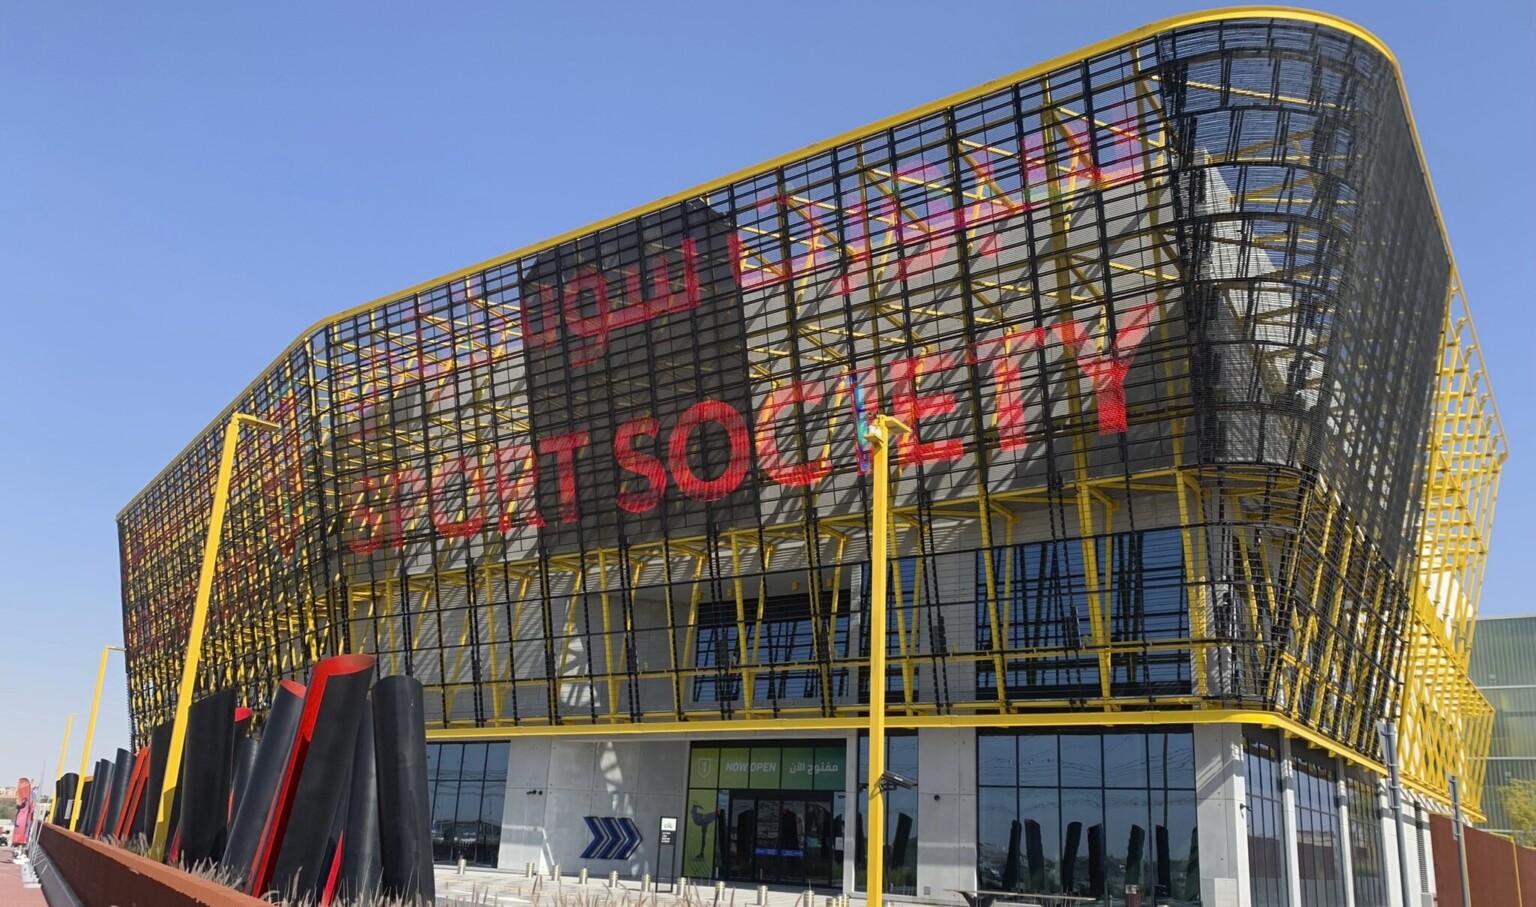 Entrance at Sport Society building with steel frame and red writing with yellow accents